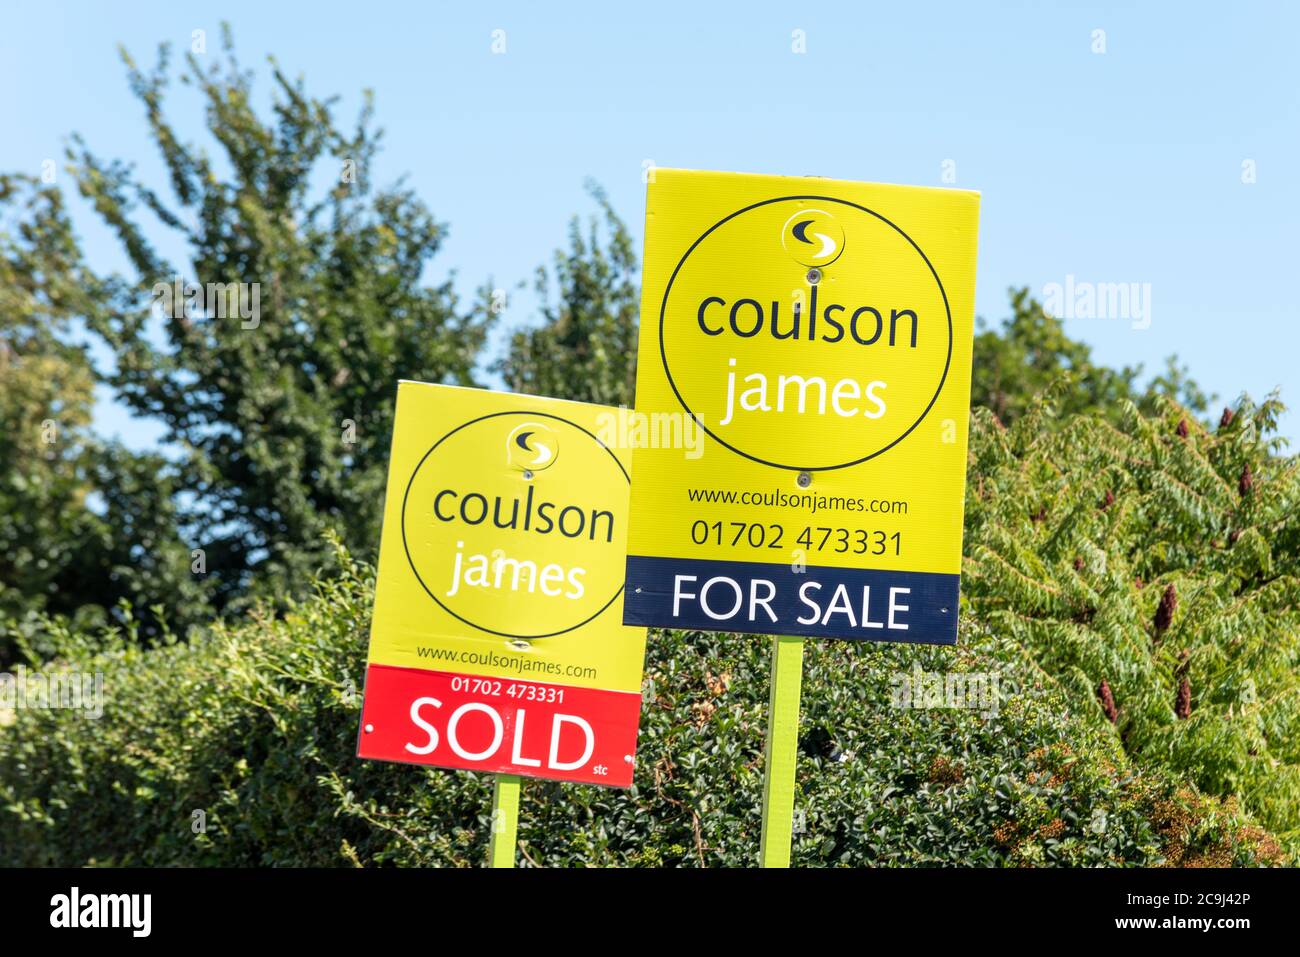 Coulson James estate agents for sale, and sold property boards. Trees. Property market in exclusive Leigh on Sea area with leafy background Stock Photo